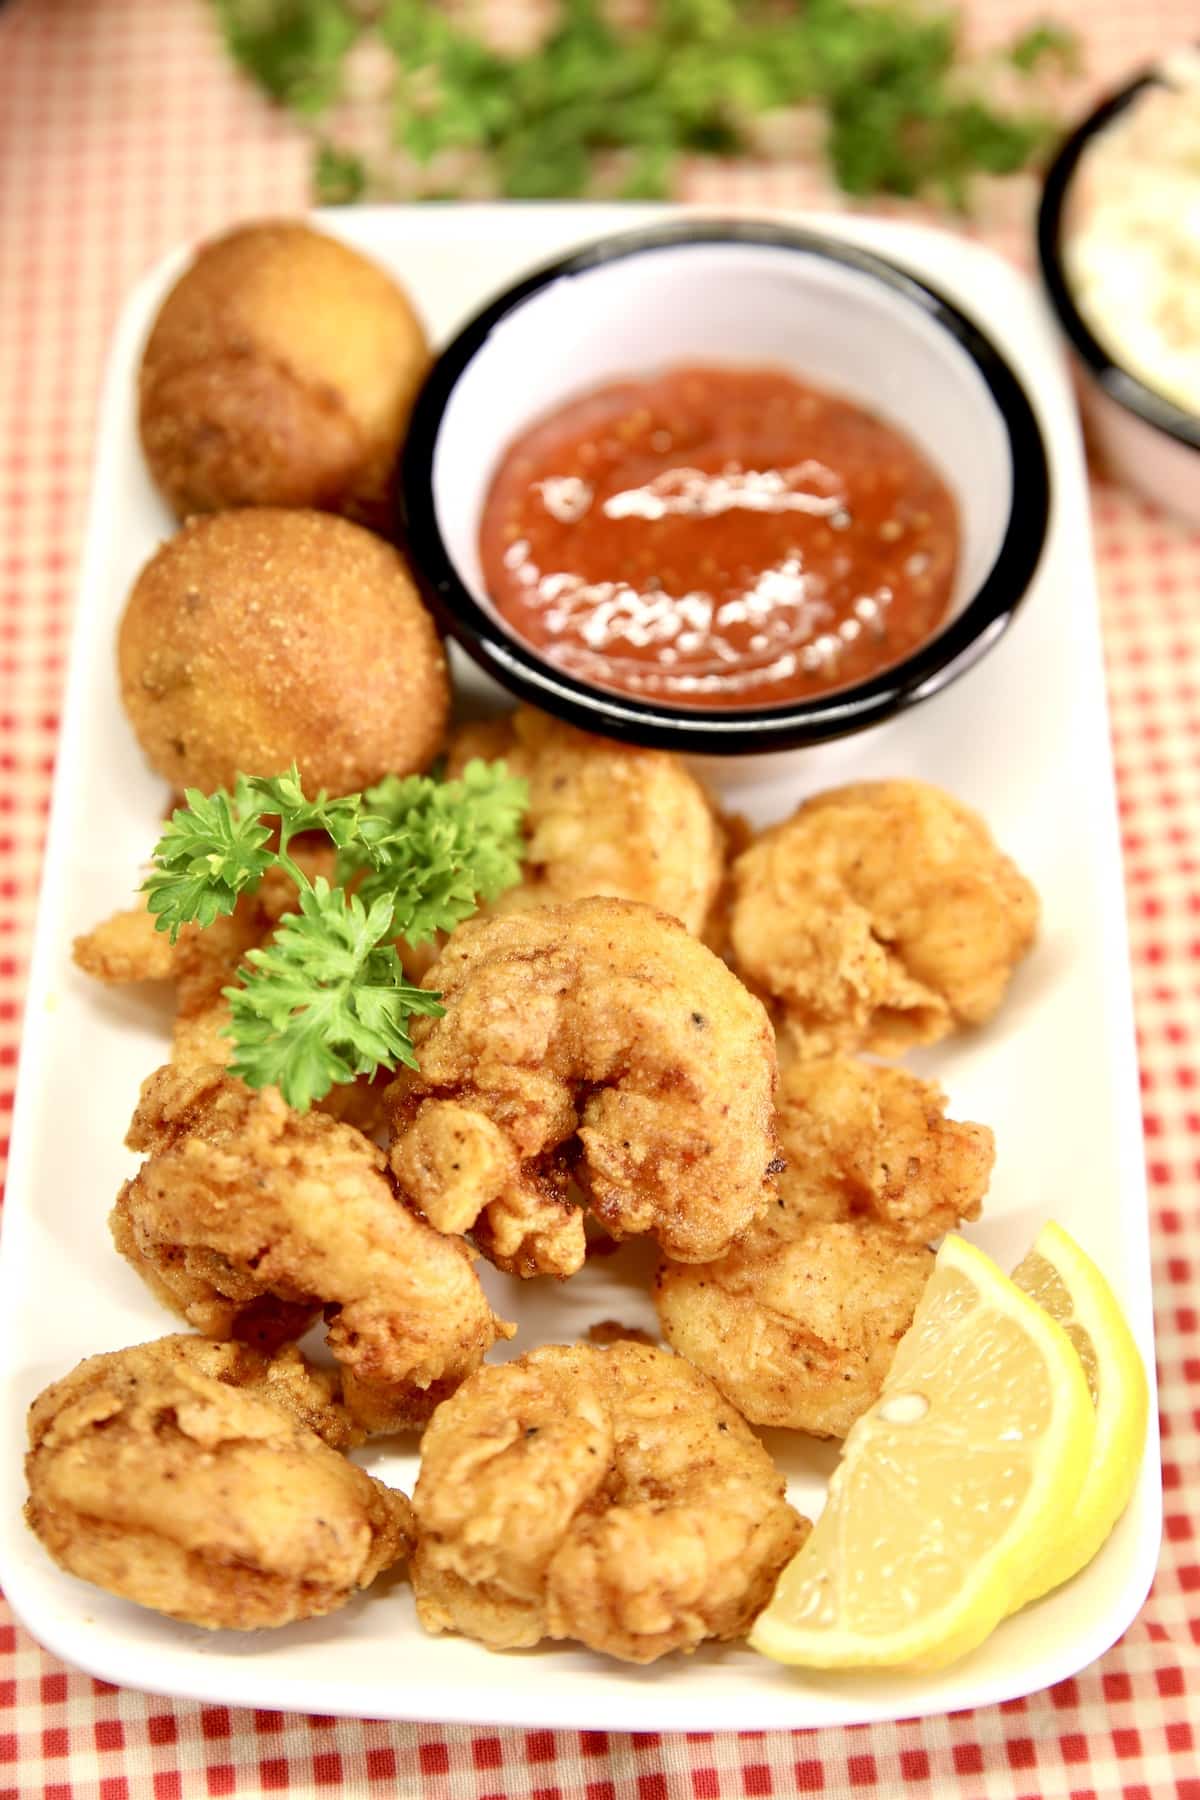 Fried shrimp on a plate with hush puppies, lemon and cocktail sauce.